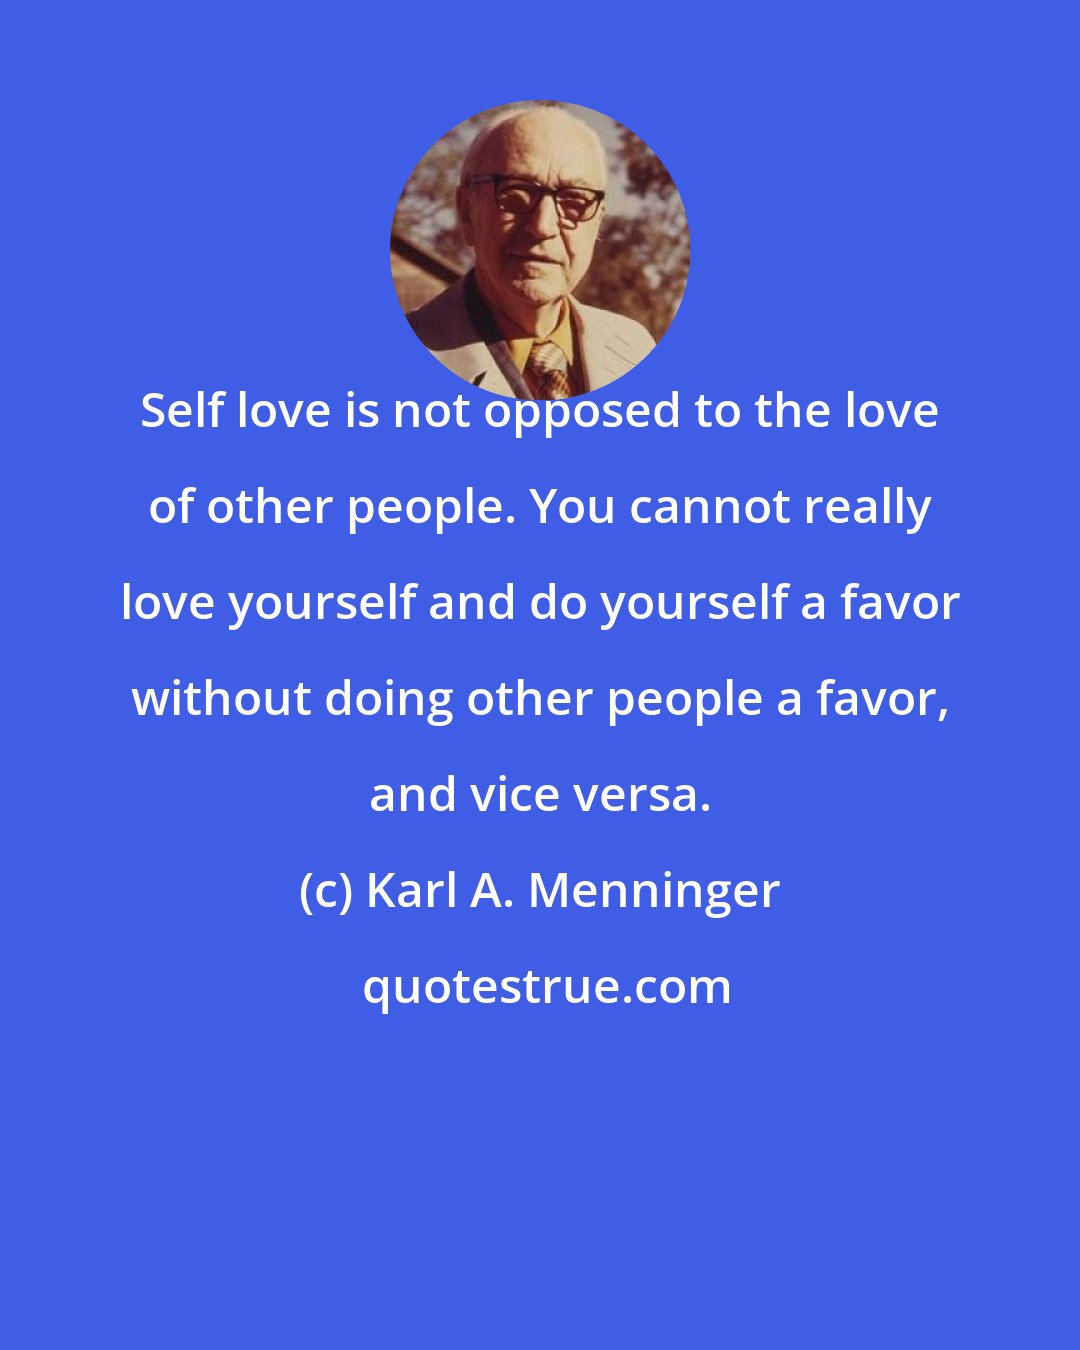 Karl A. Menninger: Self love is not opposed to the love of other people. You cannot really love yourself and do yourself a favor without doing other people a favor, and vice versa.